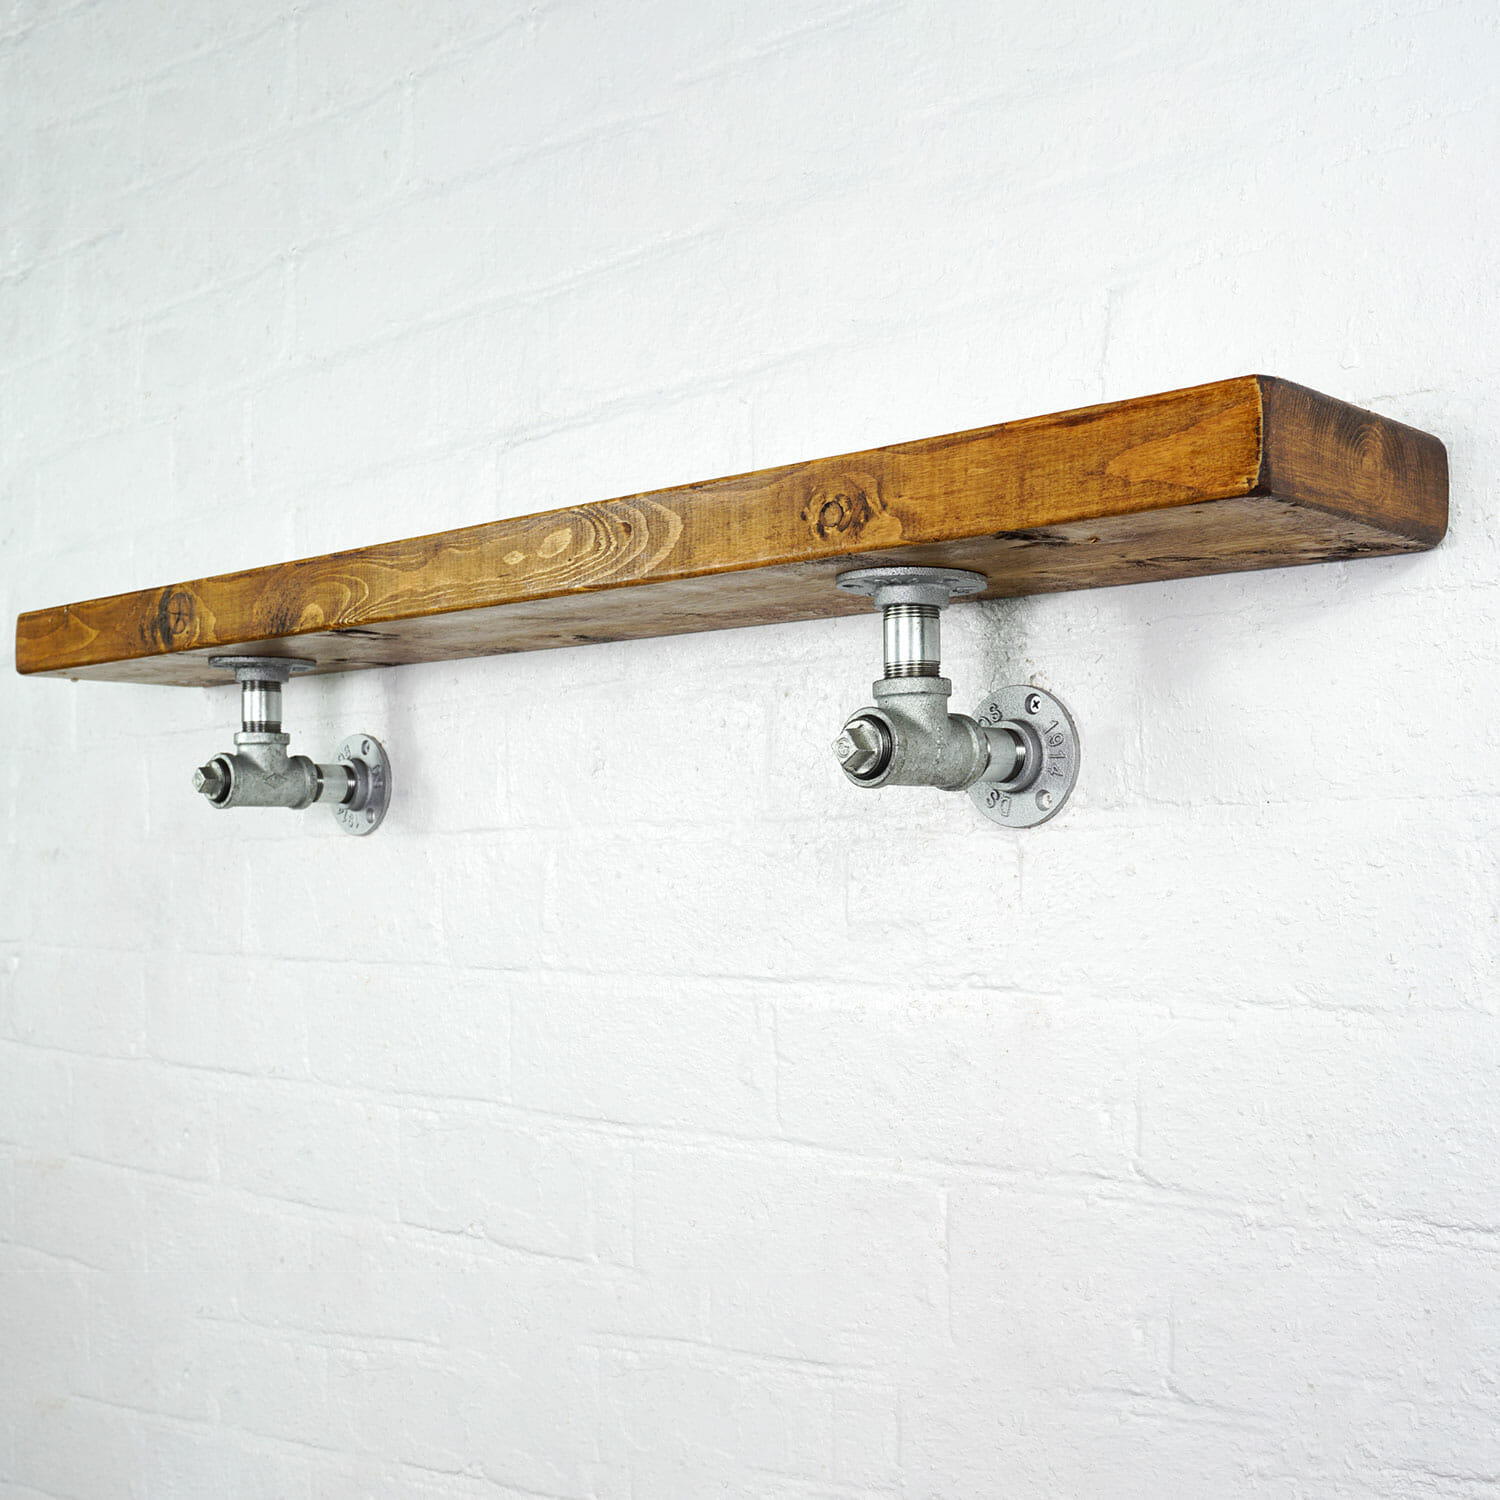 Galvanised industrial pipe with tee bracket shelving brackets with reclaimed wood scaffolding board shelf